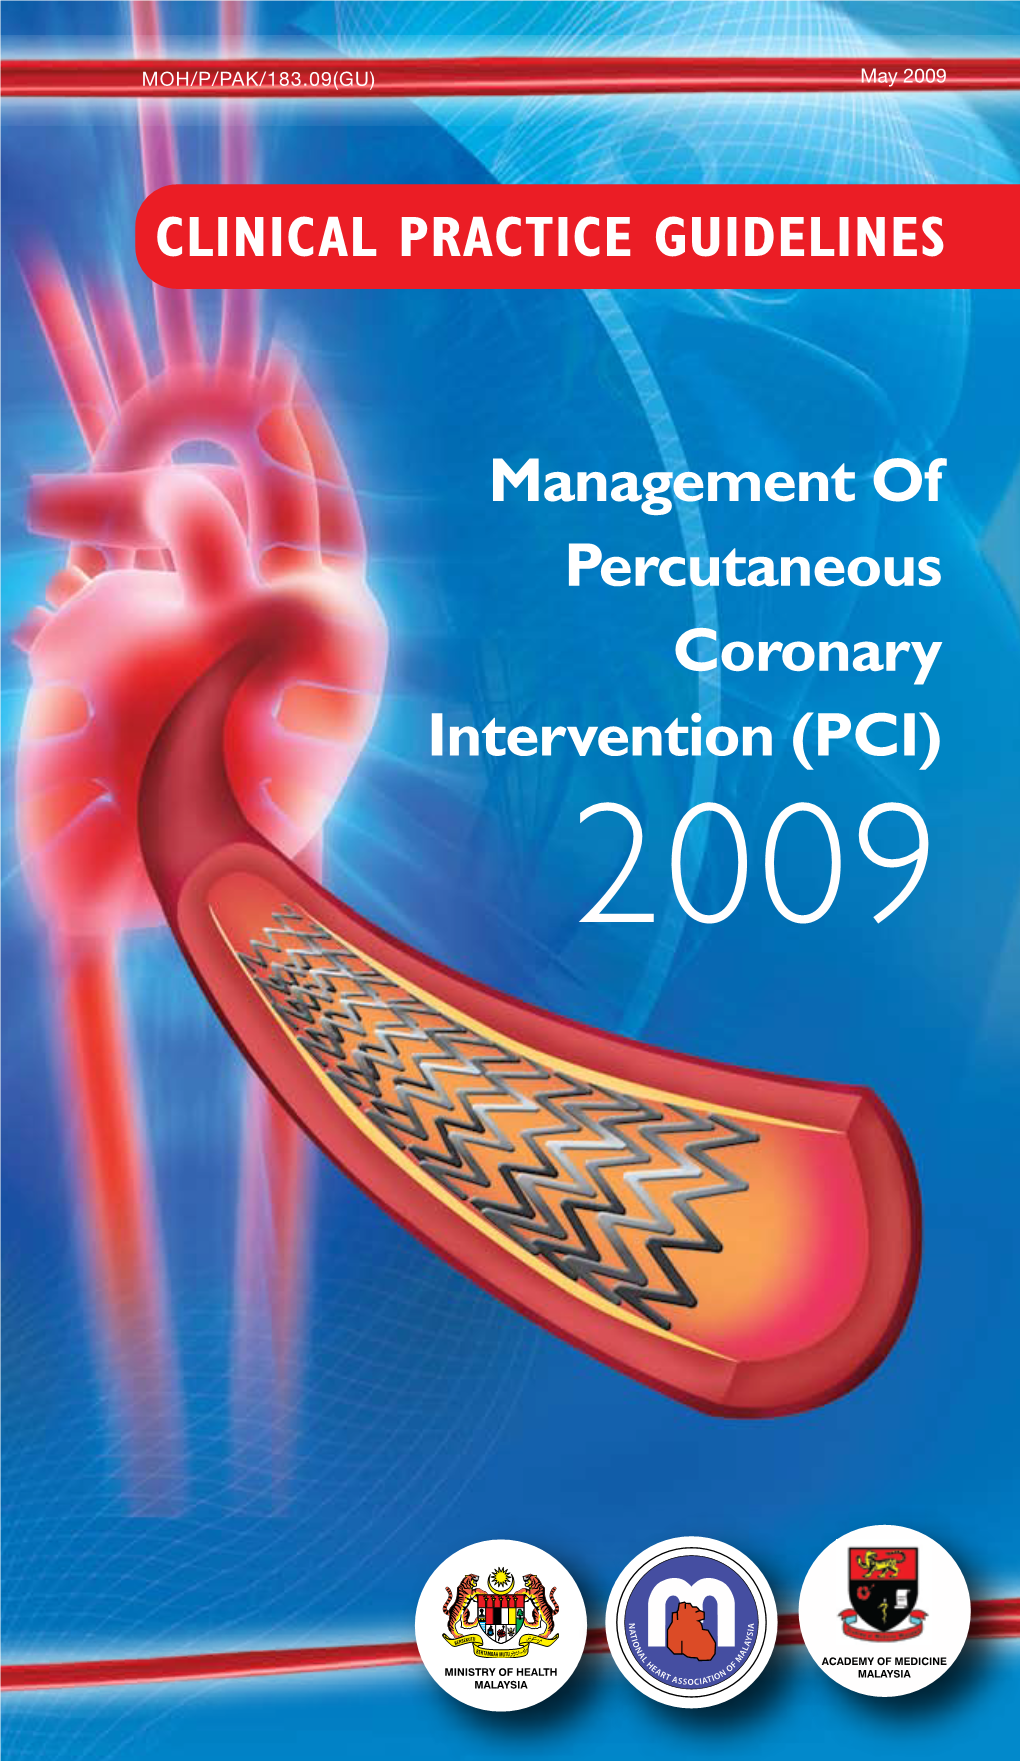 Clinical Practice Guidelines on Management of Percutaneous Coronary Intervention (PCI) 2009